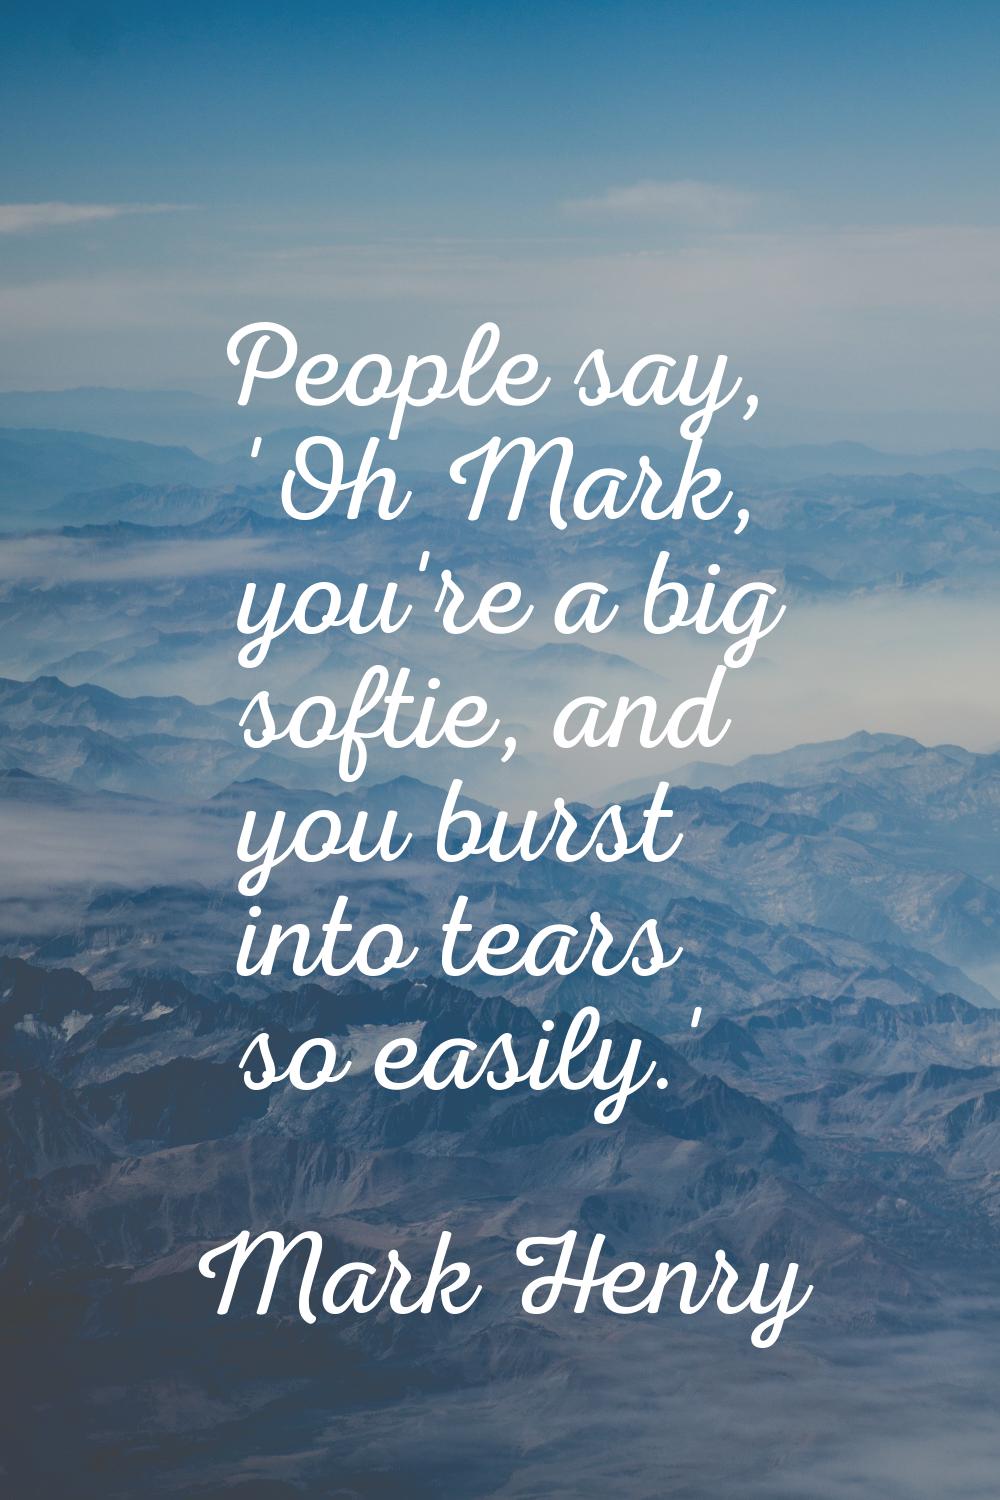 People say, 'Oh Mark, you're a big softie, and you burst into tears so easily.'